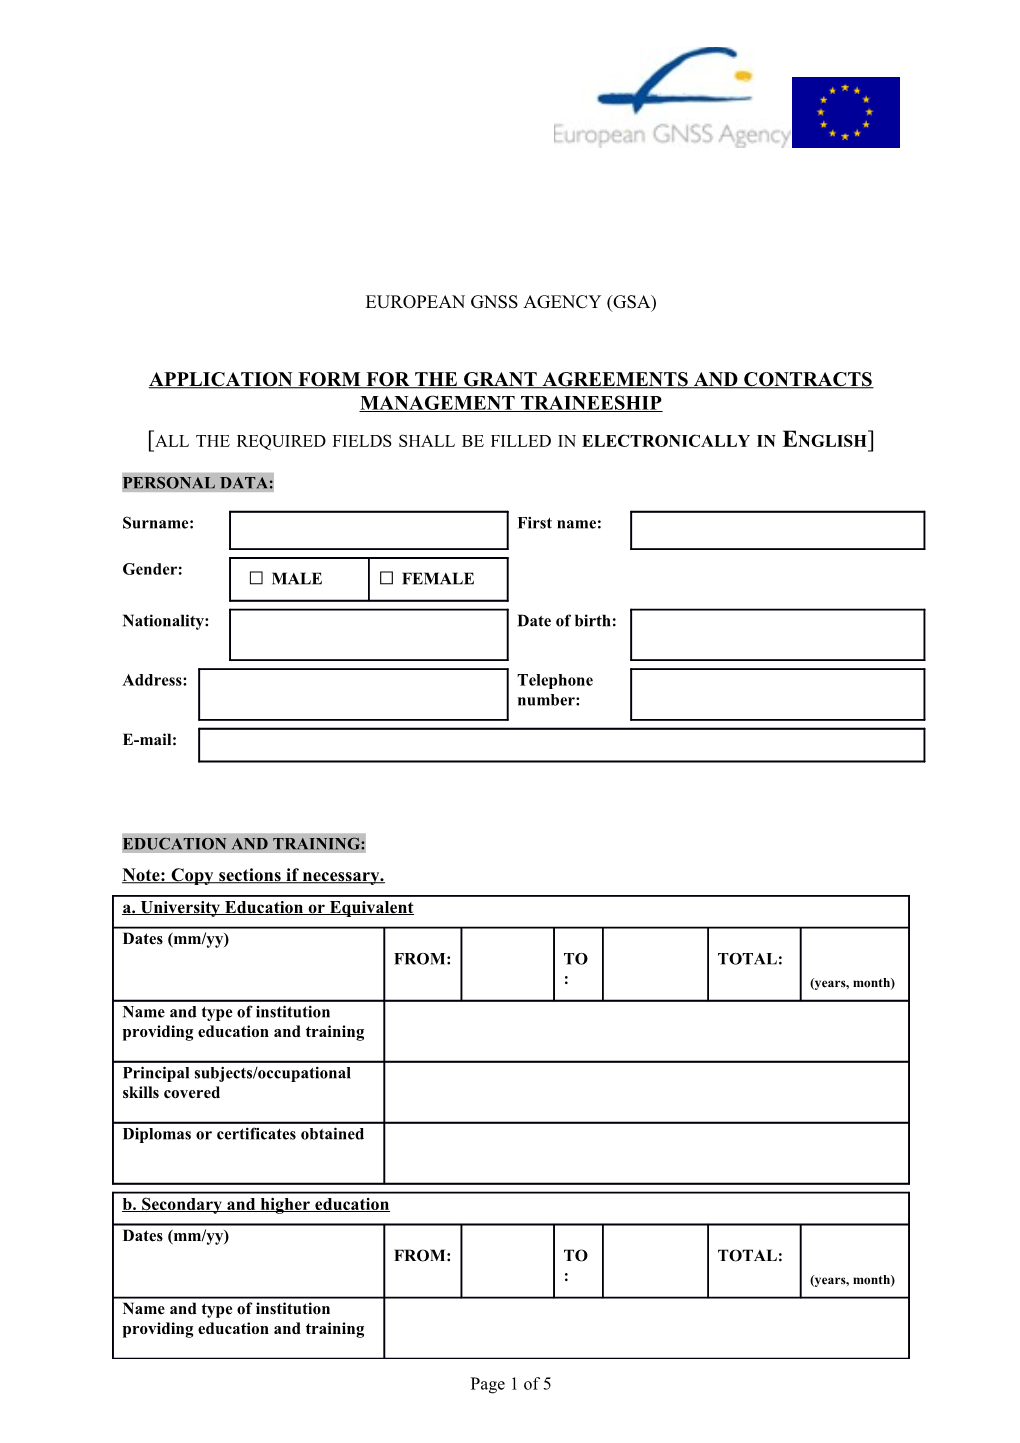 APPLICATION FORM for the GRANT AGREEMENTS and Contracts Management Traineeship